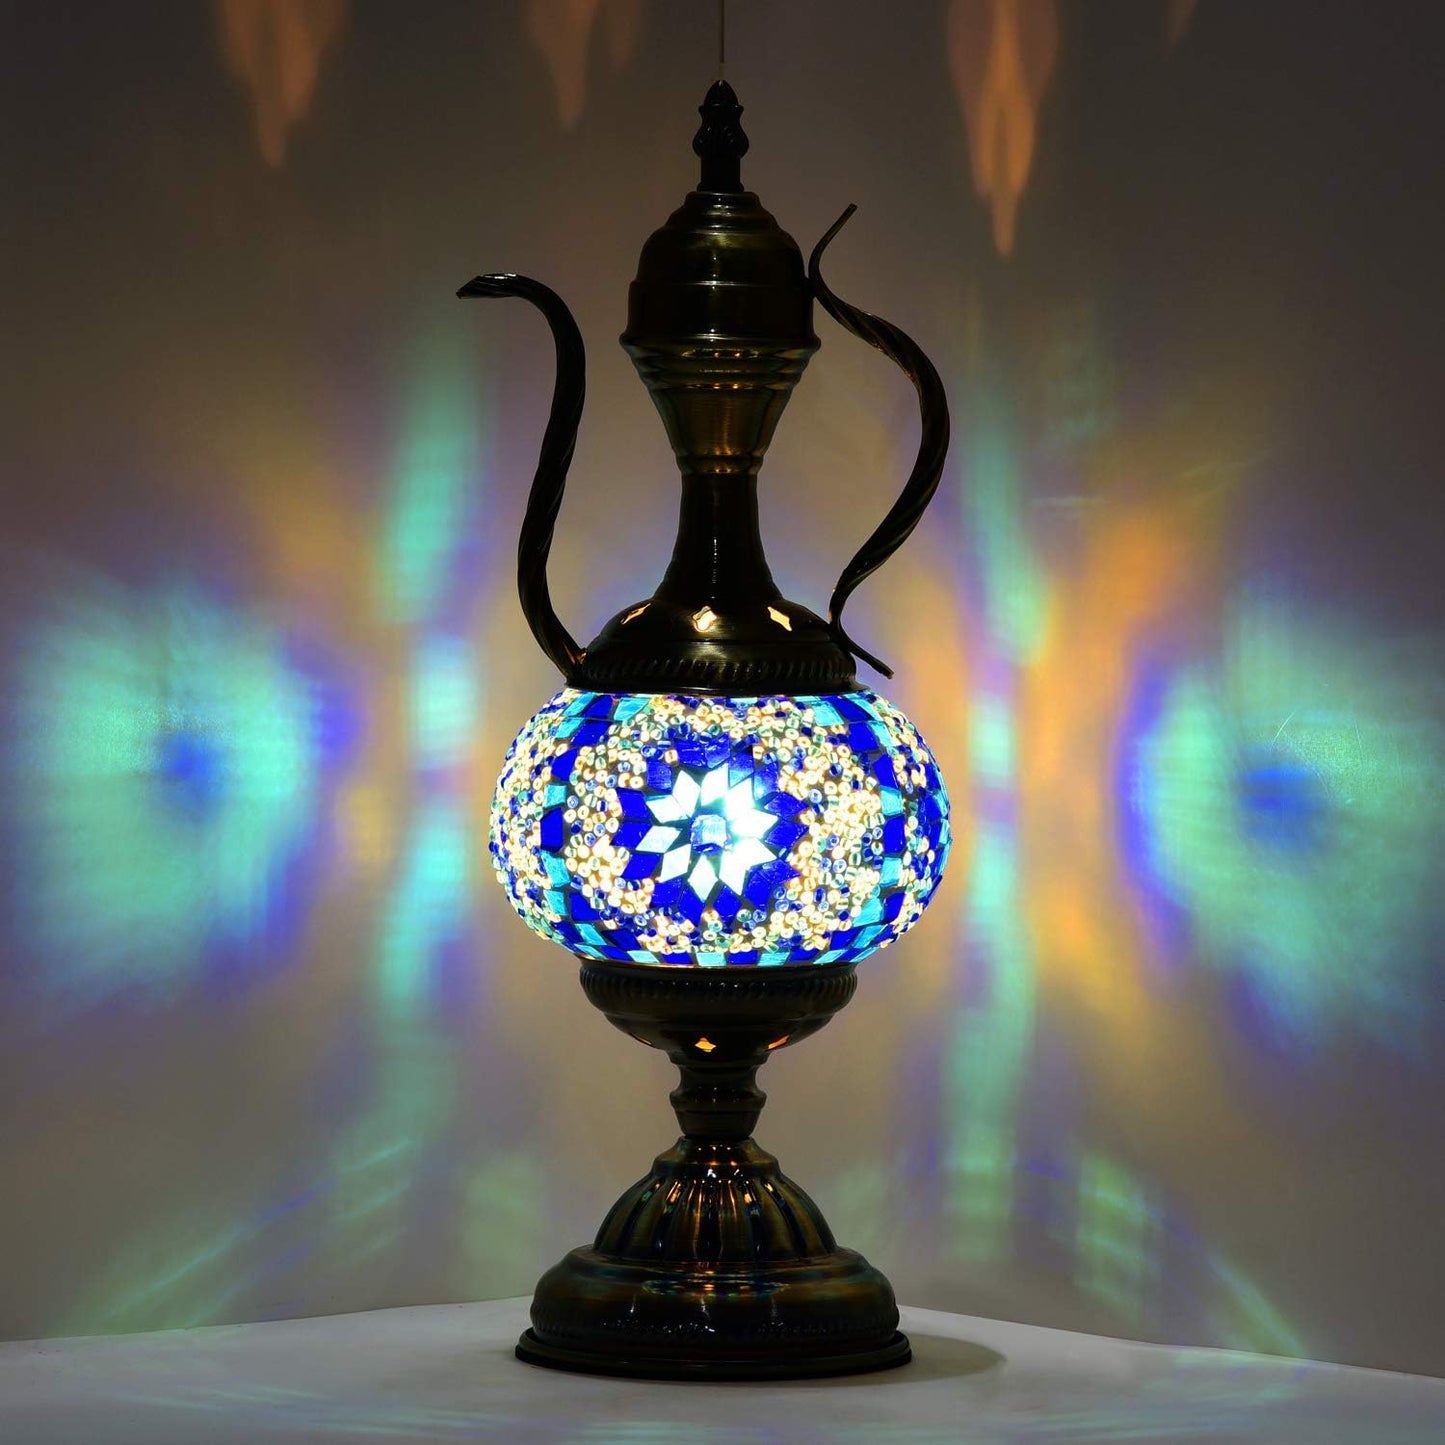 Turkish Mosaic Glass Table Lamp Teapot Moroccan Lantern Decorative Tiffany Style Desk Night Light for Bedroom,Living Room, Coffee Table (Blue)